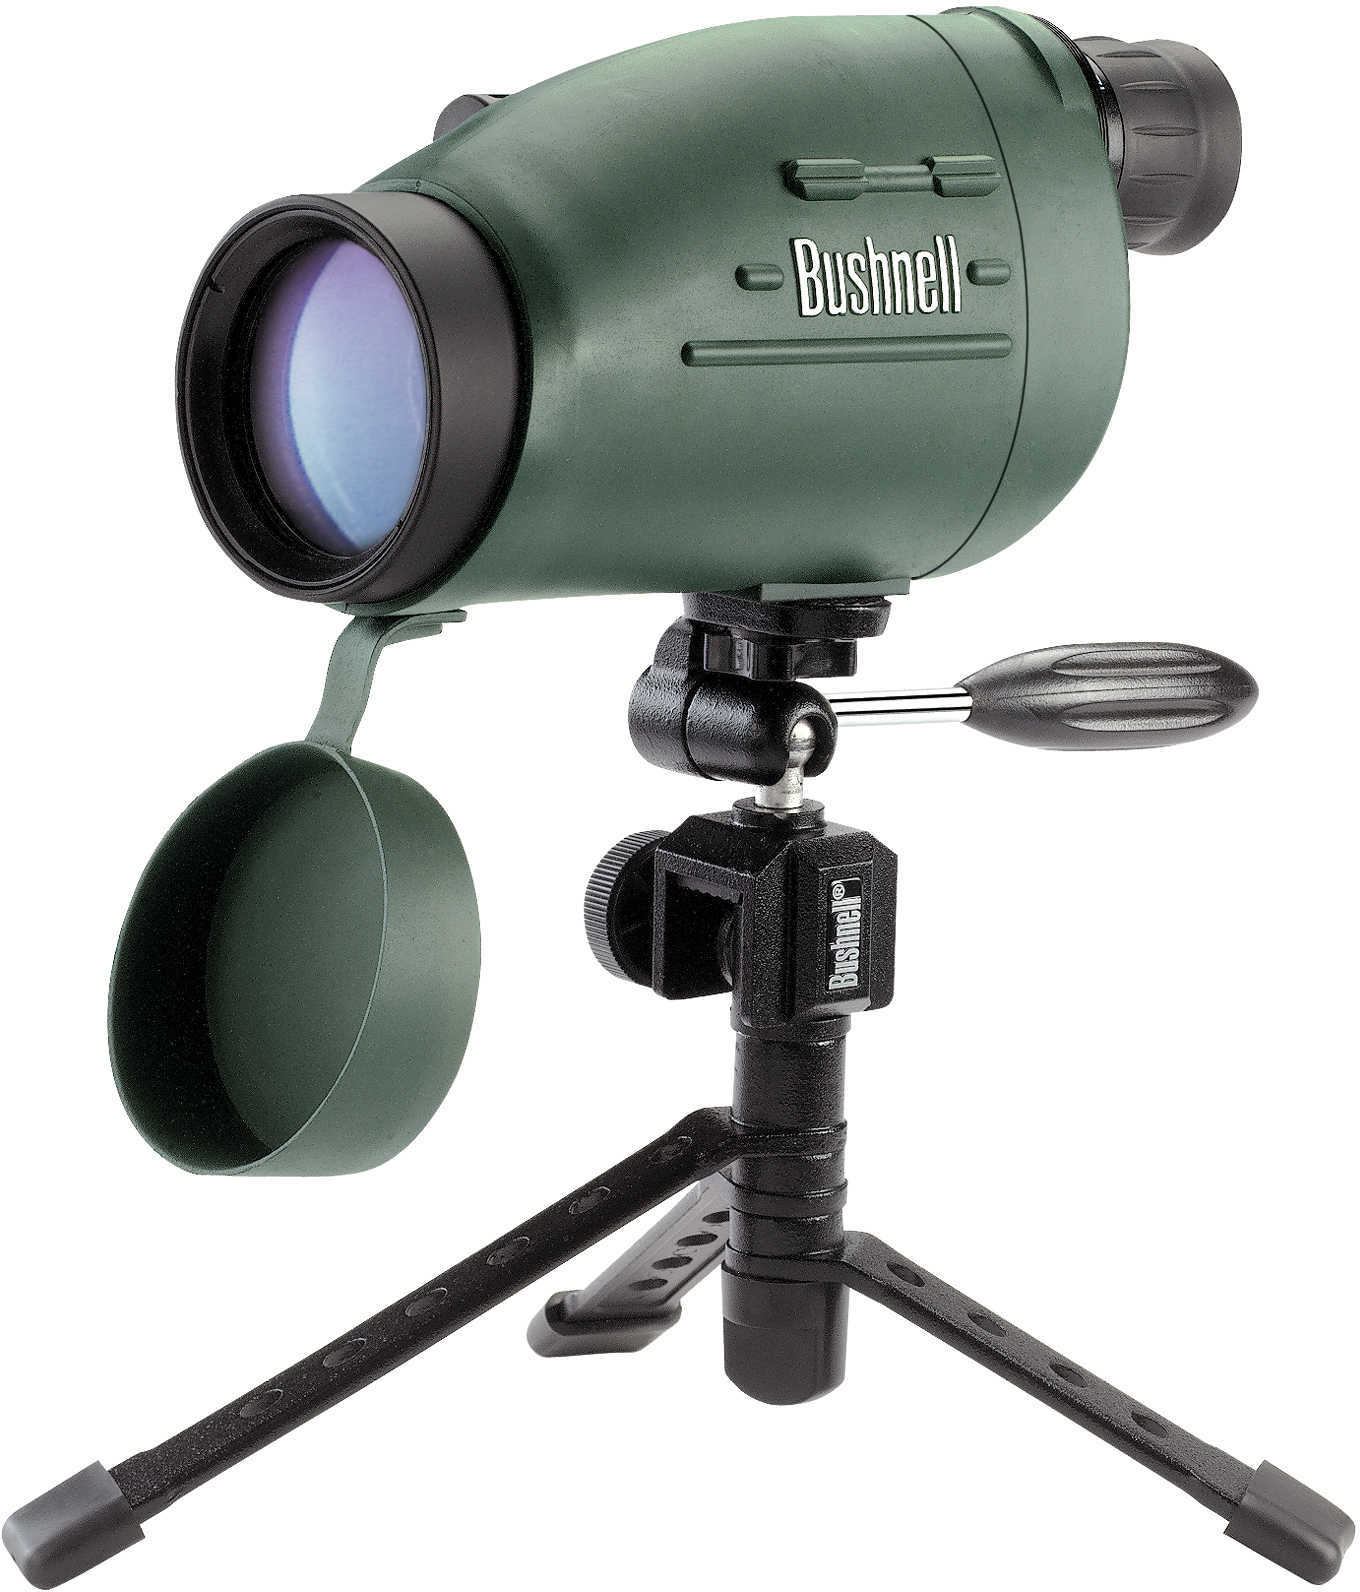 Bushnell Sentry Spotting Scope 12-36X50 Ultra Compact Waterproof Includes Carrying Pouch OD Green 789332